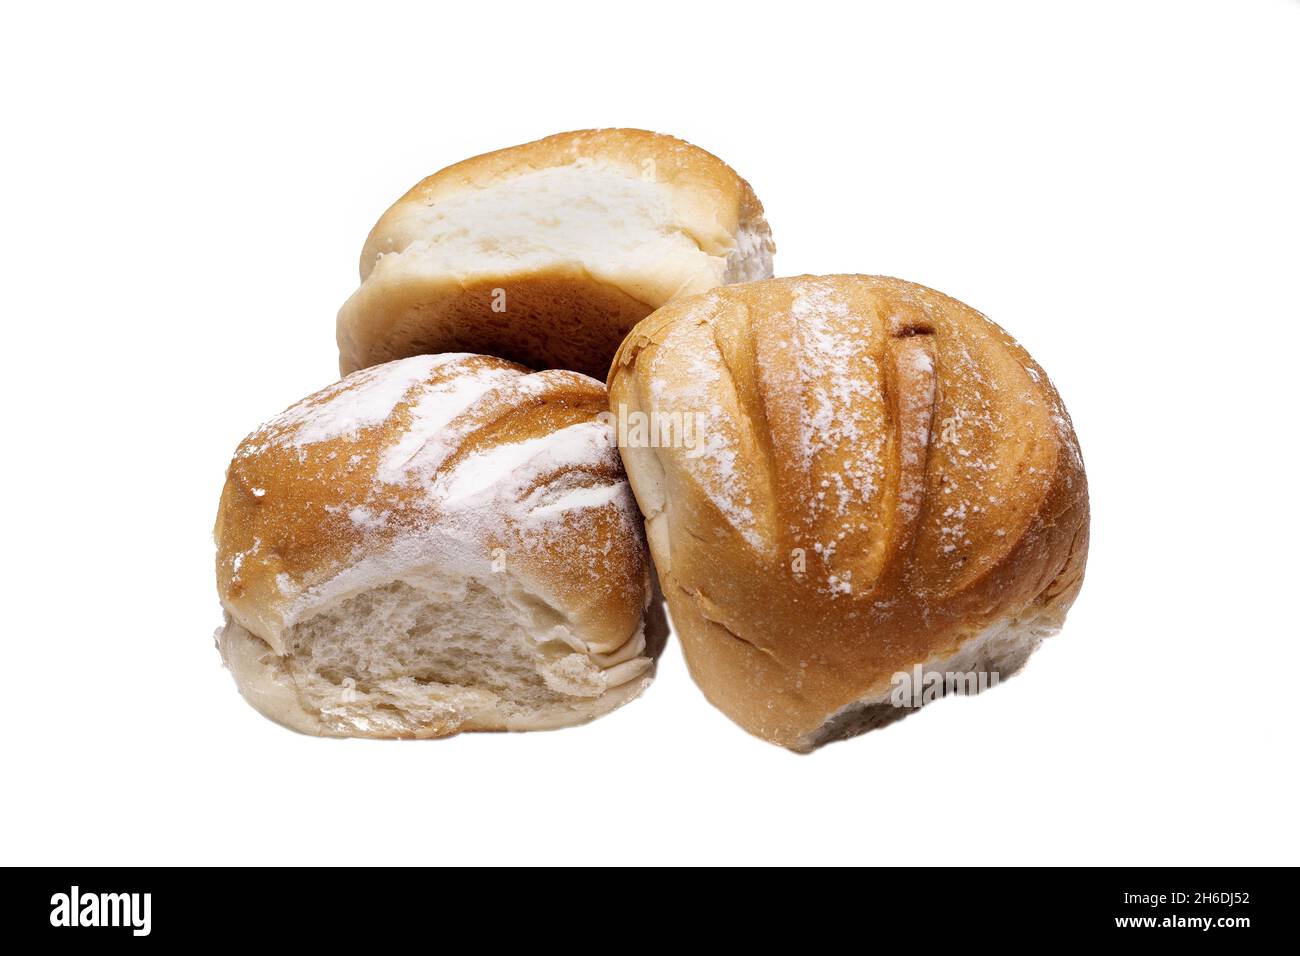 thre wwwe pieces of round bread Stock Photo